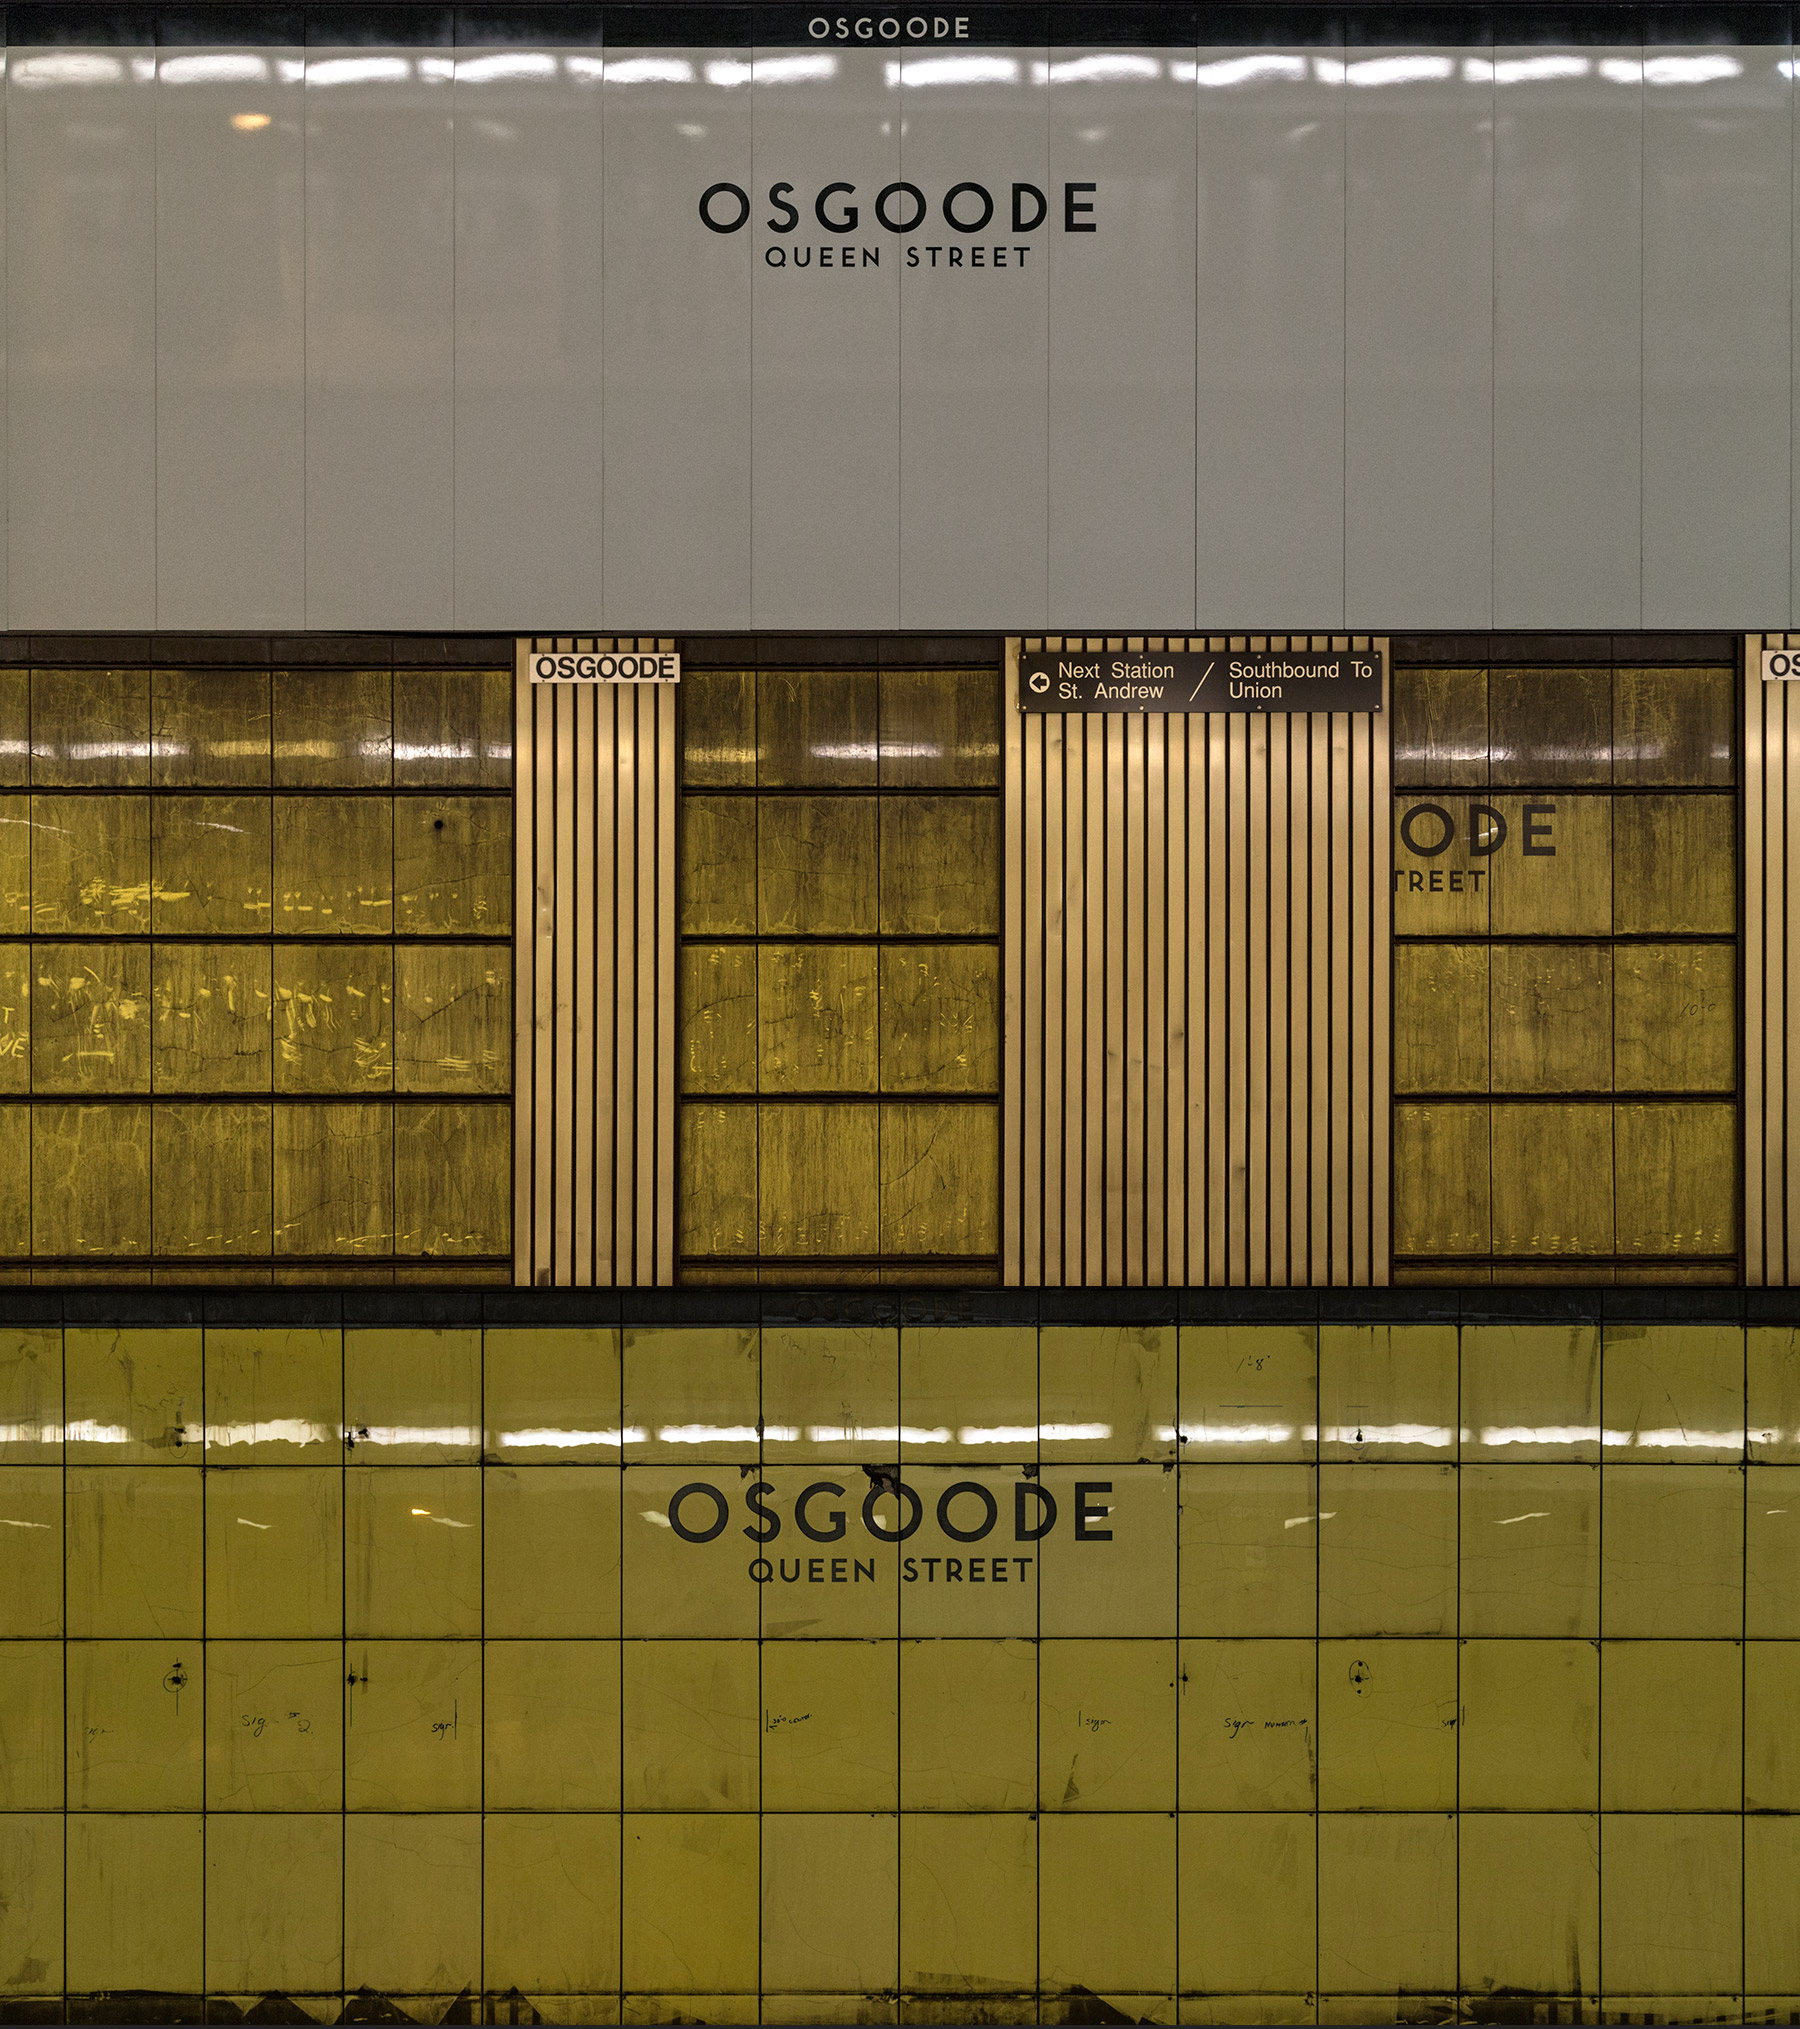 20160122. Toronto Osgoode Station's new look - better than befor